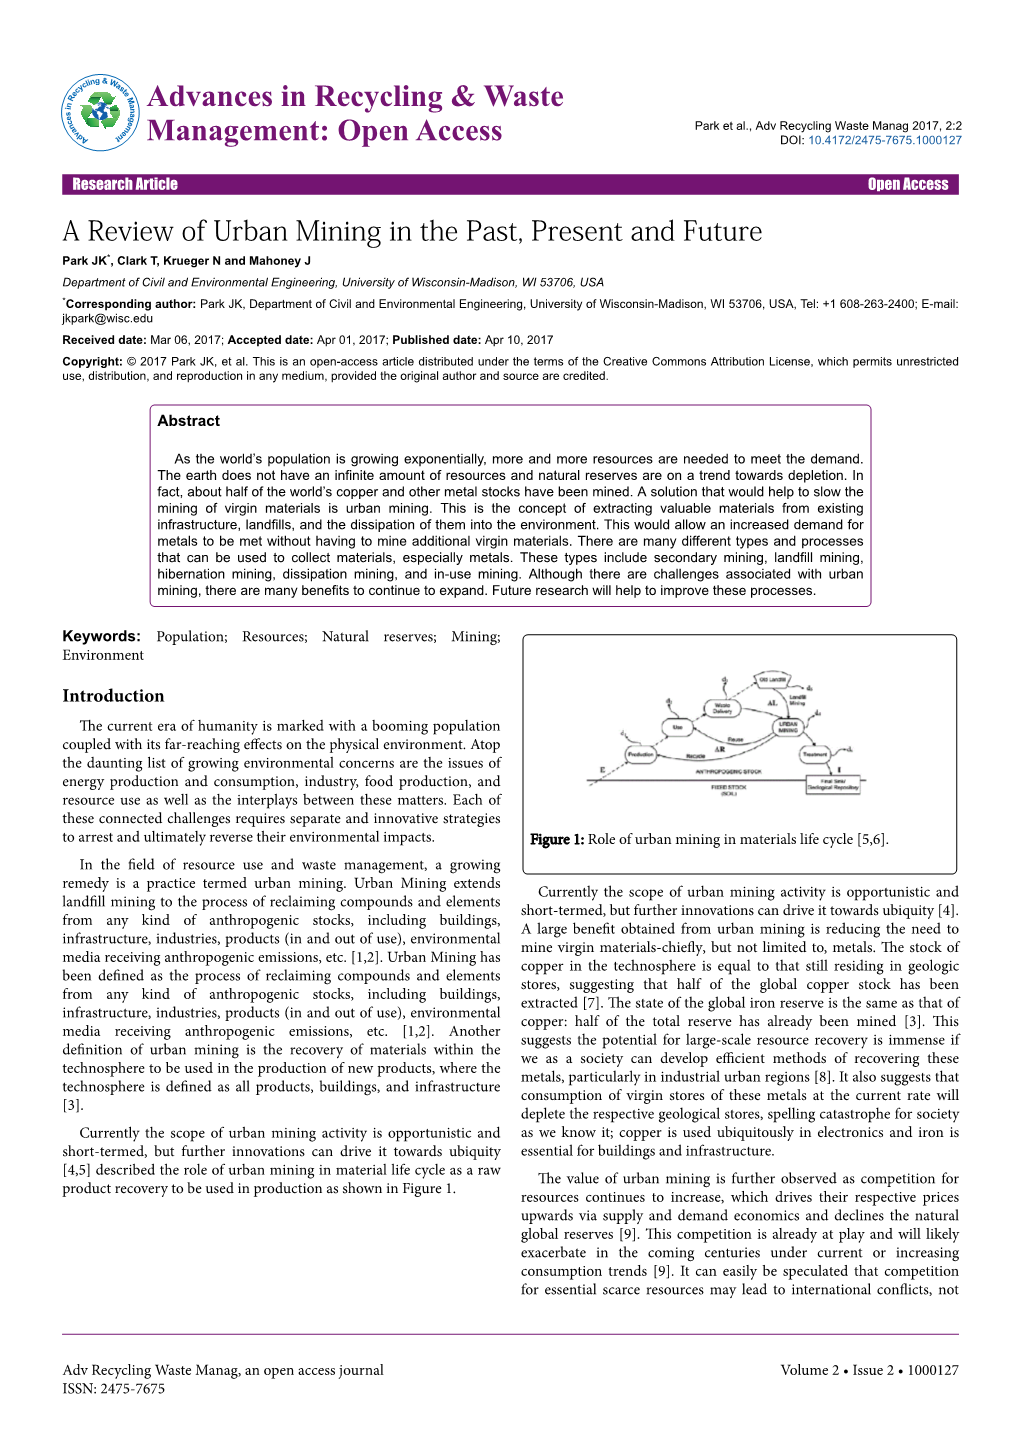 A Review of Urban Mining in the Past, Present and Future